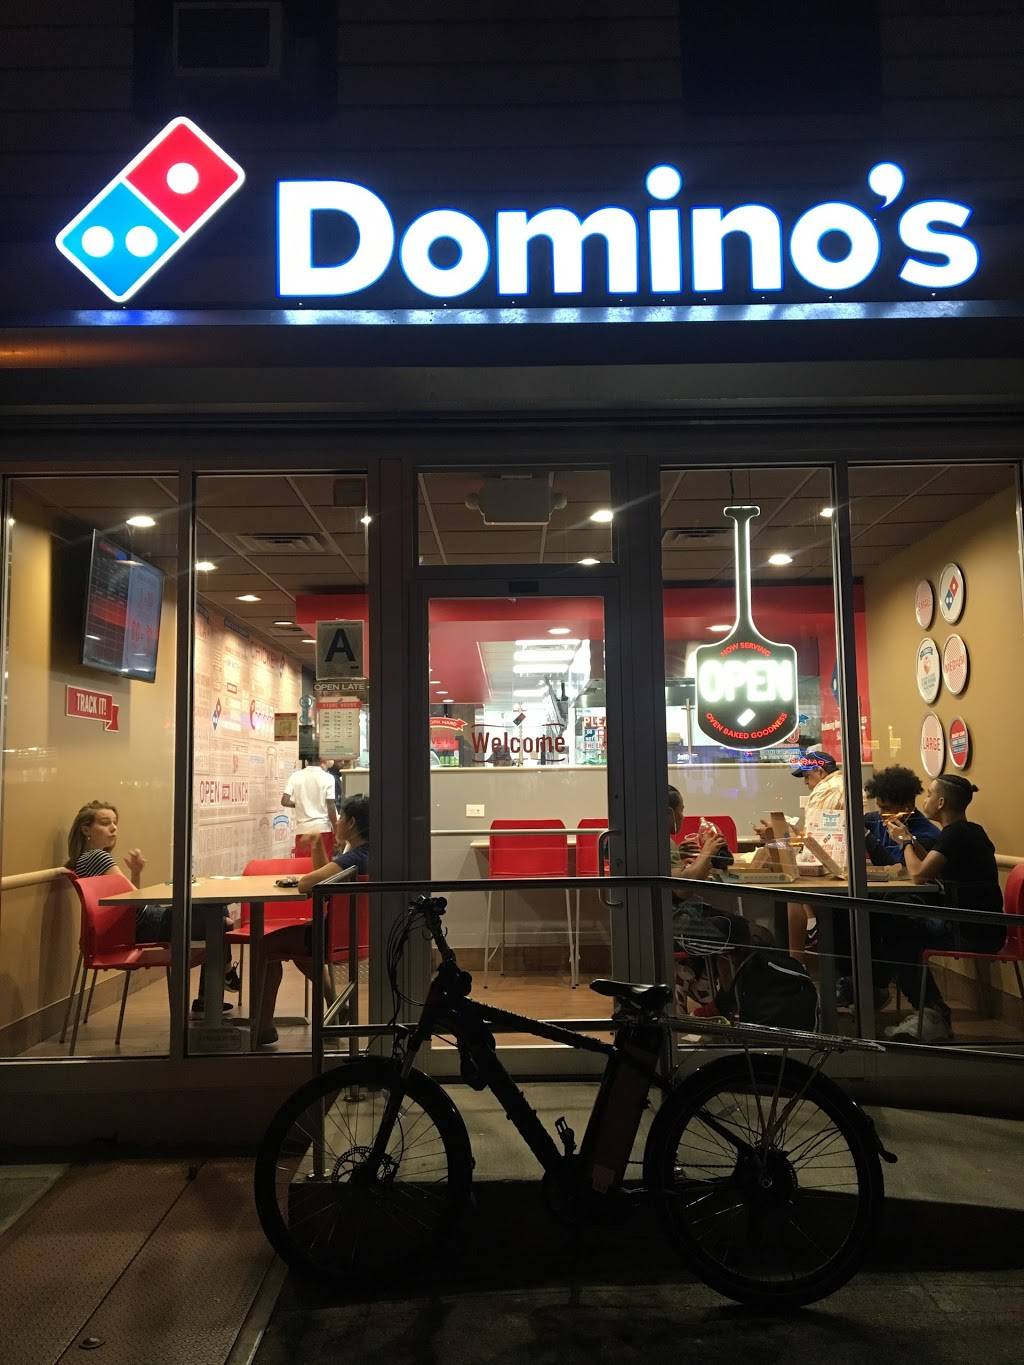 Dominos Pizza | meal delivery | 1988 Amsterdam Ave, New York, NY 10032, USA | 2129233030 OR +1 212-923-3030